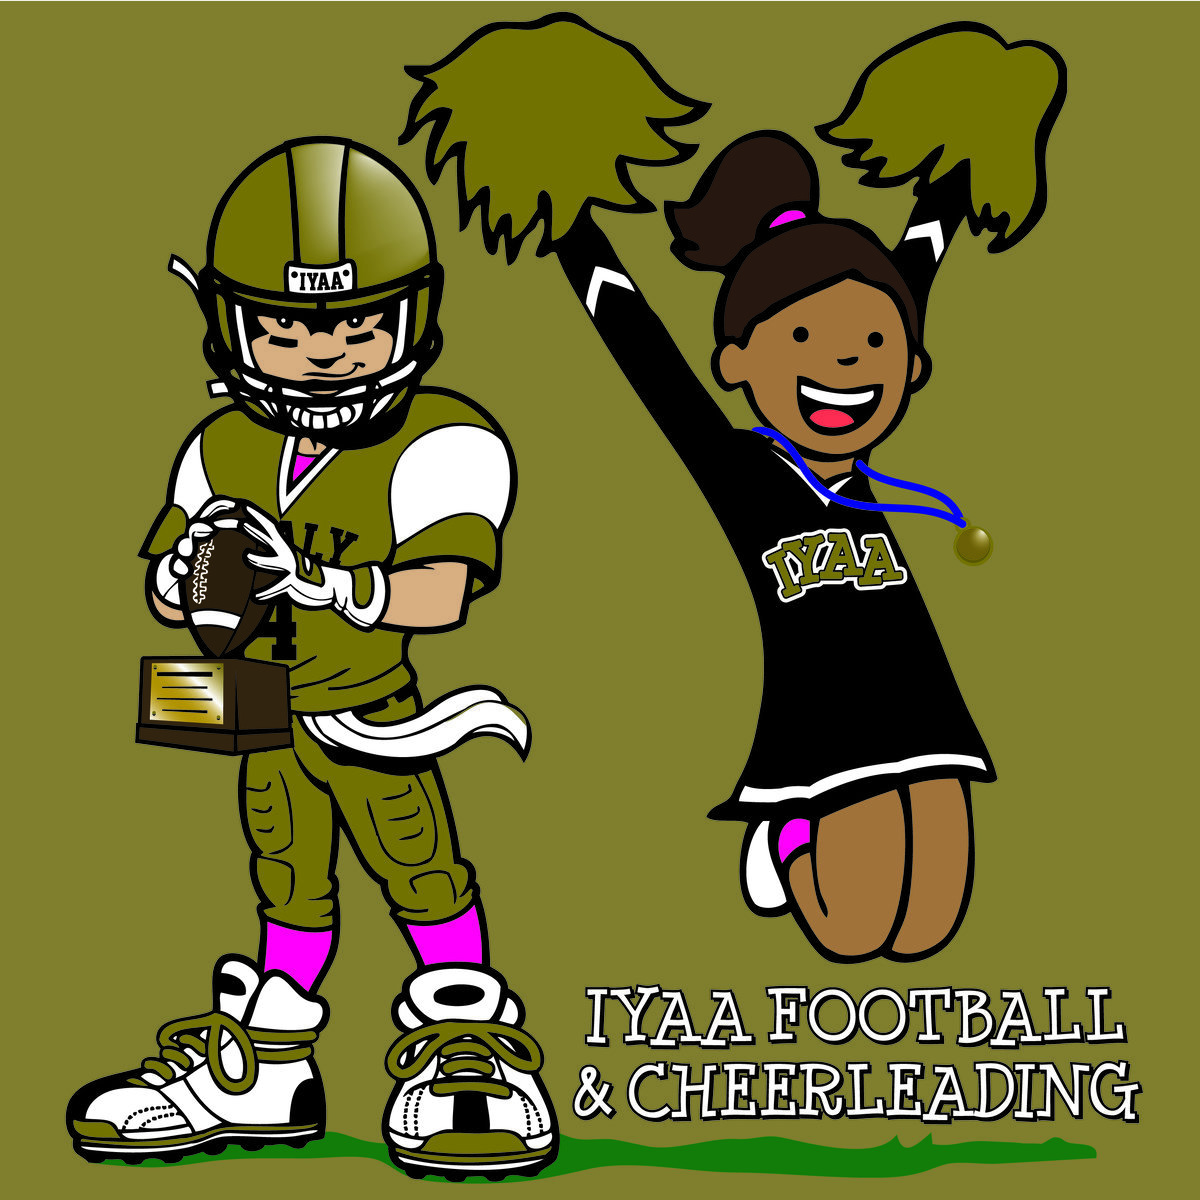 Image: It is official, IYAA Football and Cheerleading (Facebook) has launched a new website on IYAA (League Lineup) ! Parents can now conveniently register their child for football or cheerleading and pay online as well. First in-person Signup will be Saturday, June 3rd, from 10:00 a.m. – 12:00 p.m. at the Pavilion in downtown Italy.